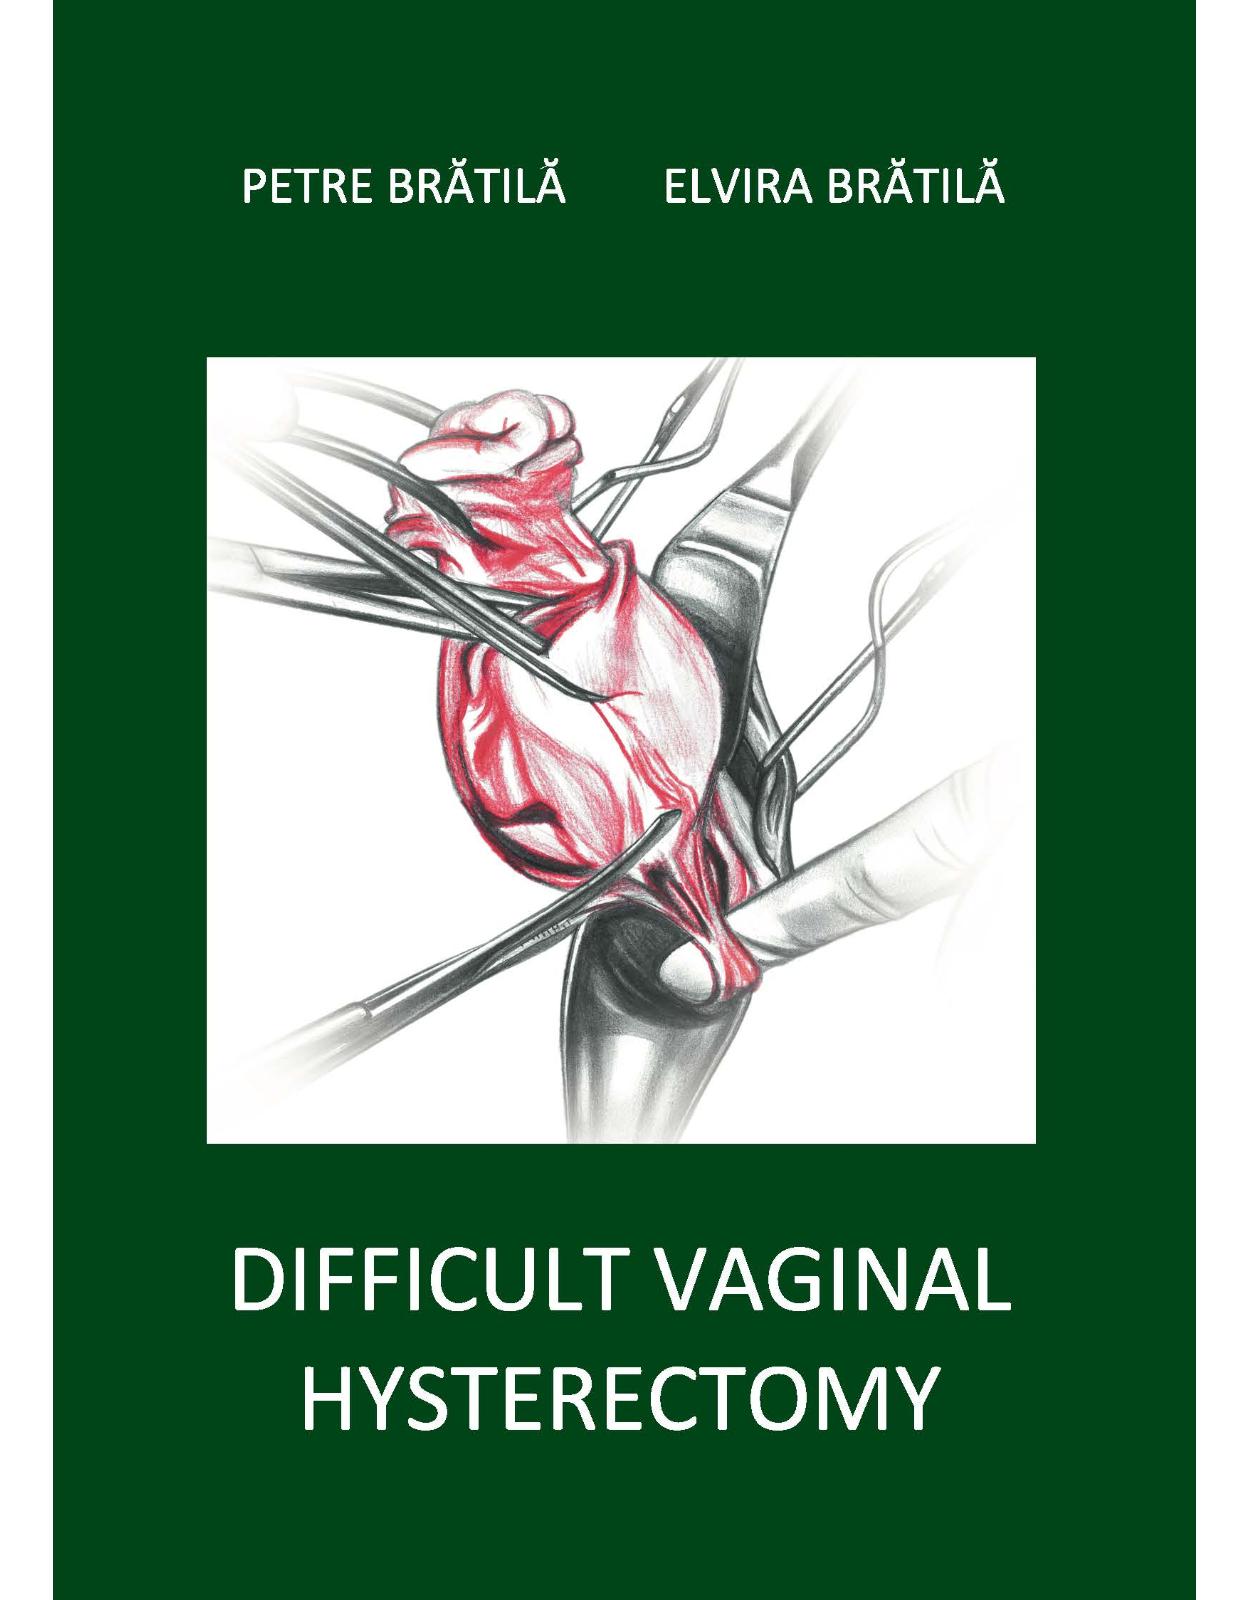 Difficult vaginal hysterectomy